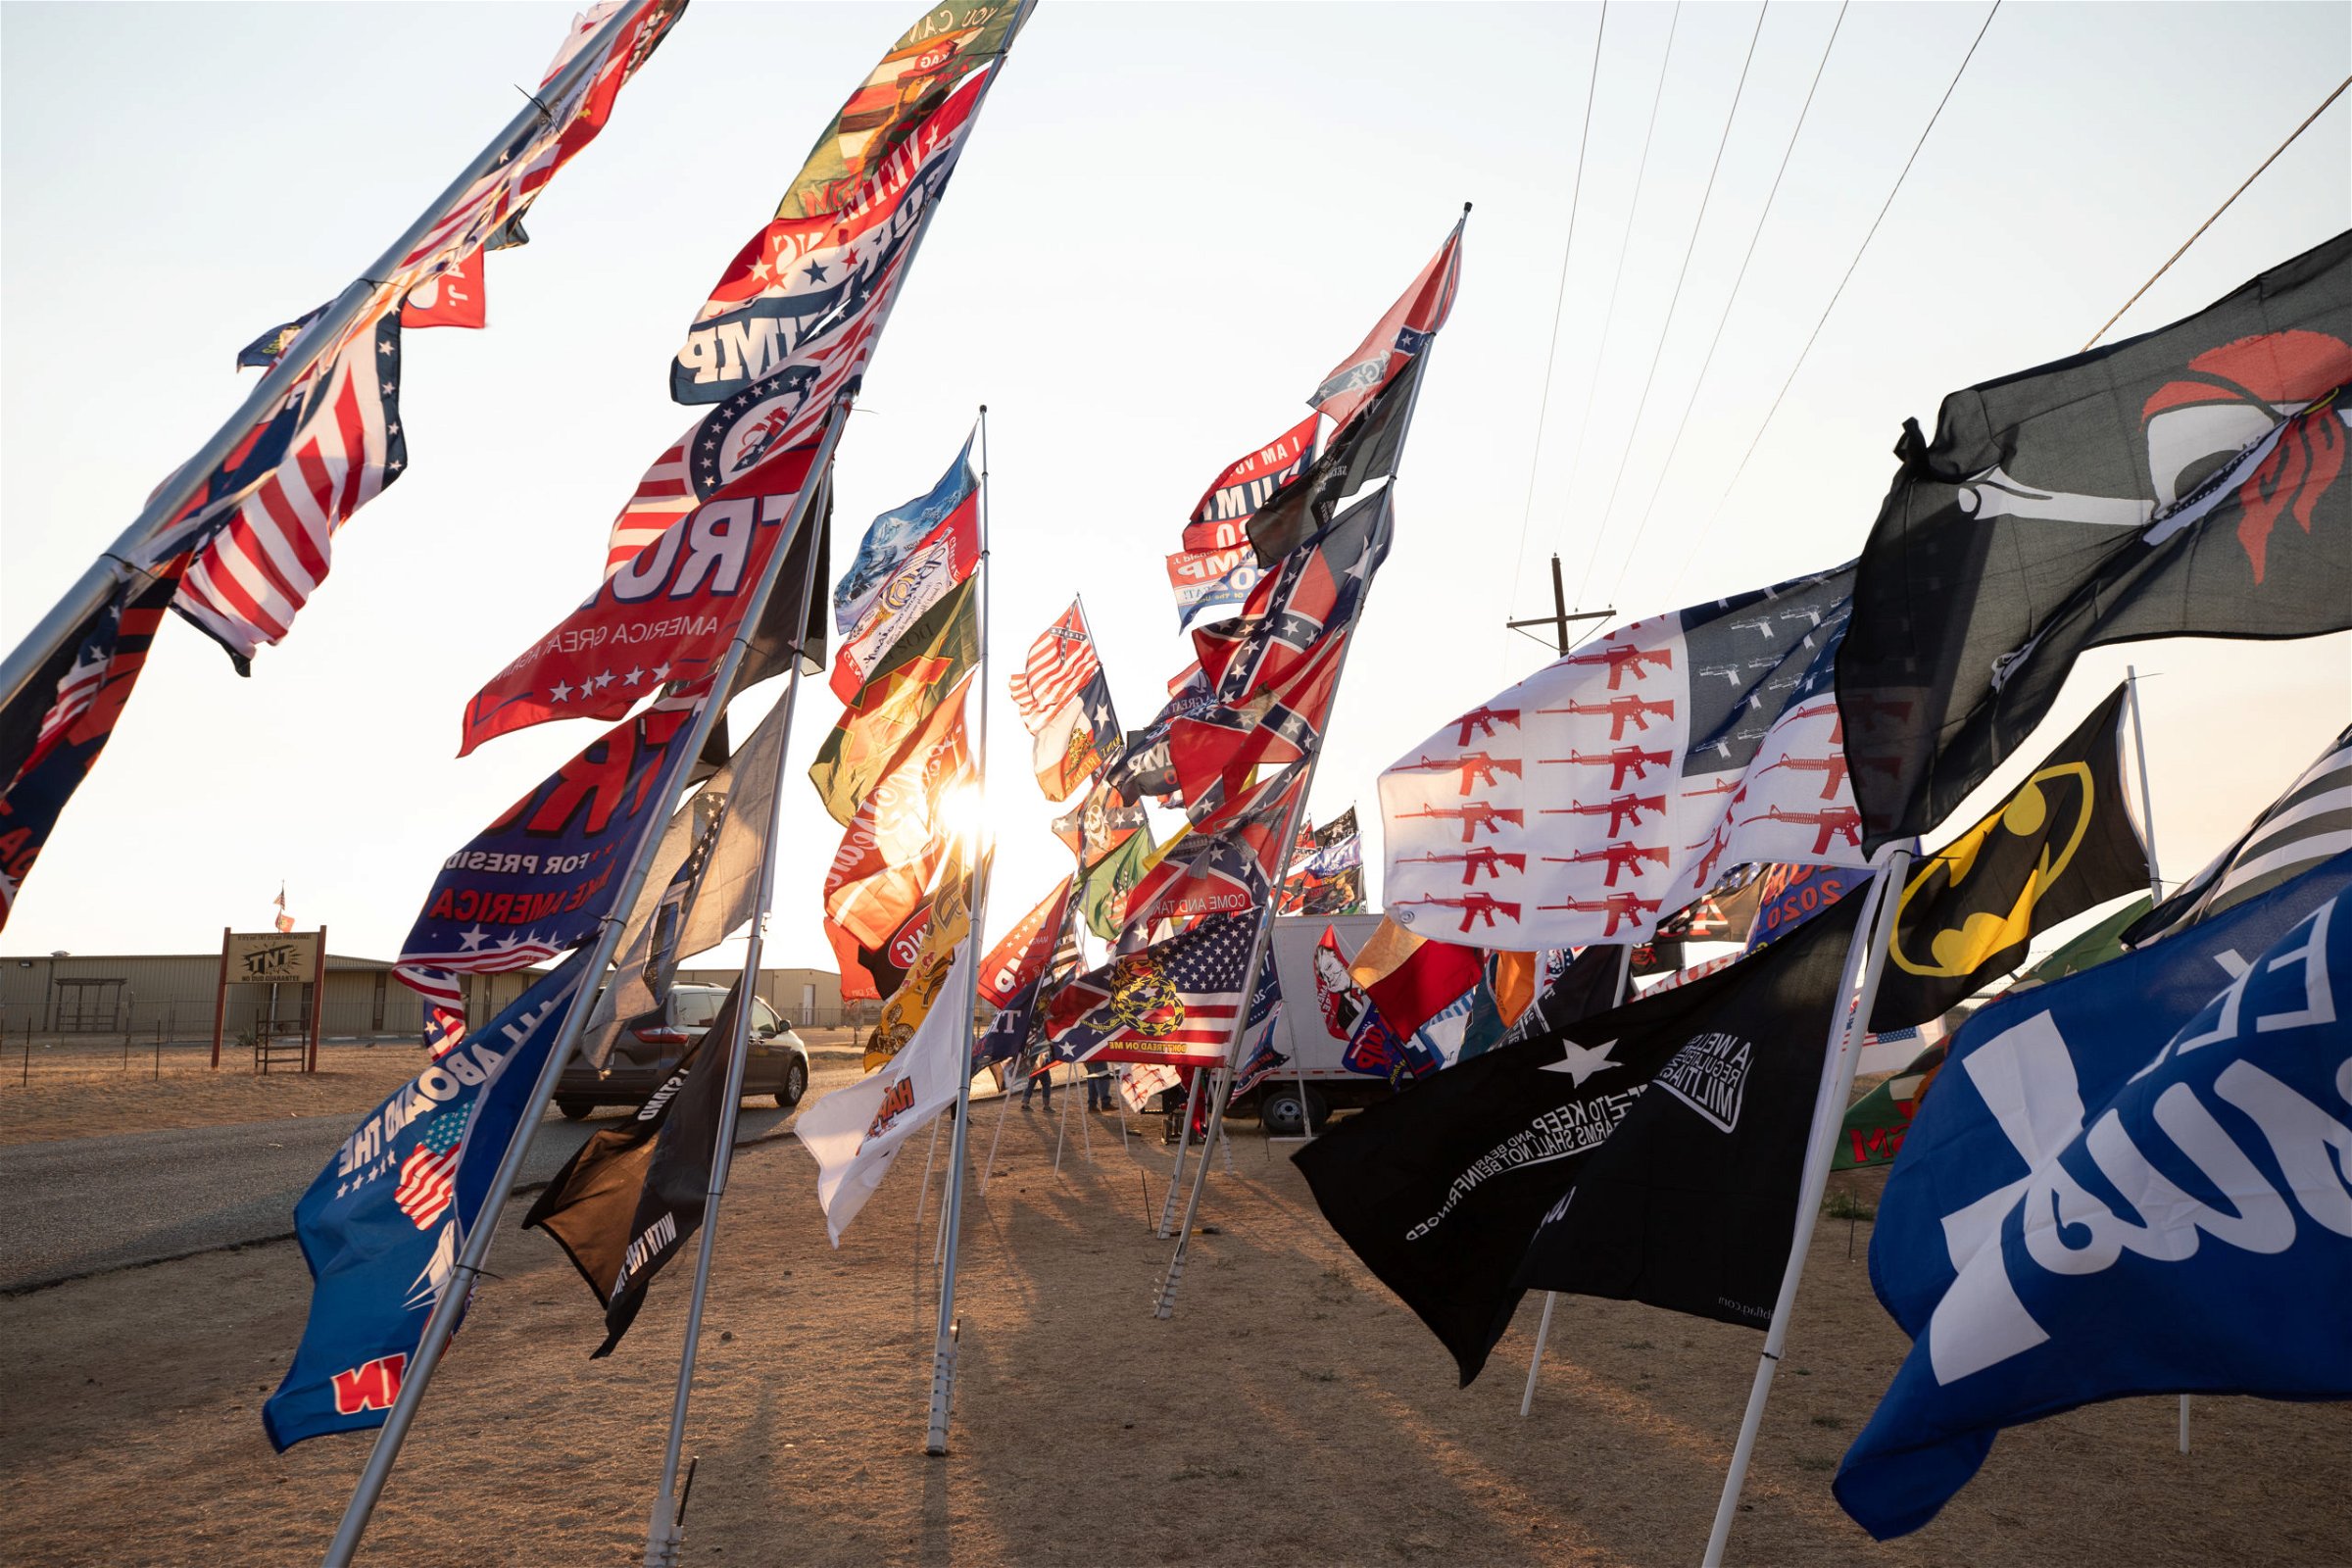 Flags fly outside Cooks Garage, the meeting place of hundreds of President Donald Trump supporters after a "Trump Train" car parade in Lubbock, Texas, on Sunday, Oct. 18, 2020. (Kaylee Greenlee - DCNF)